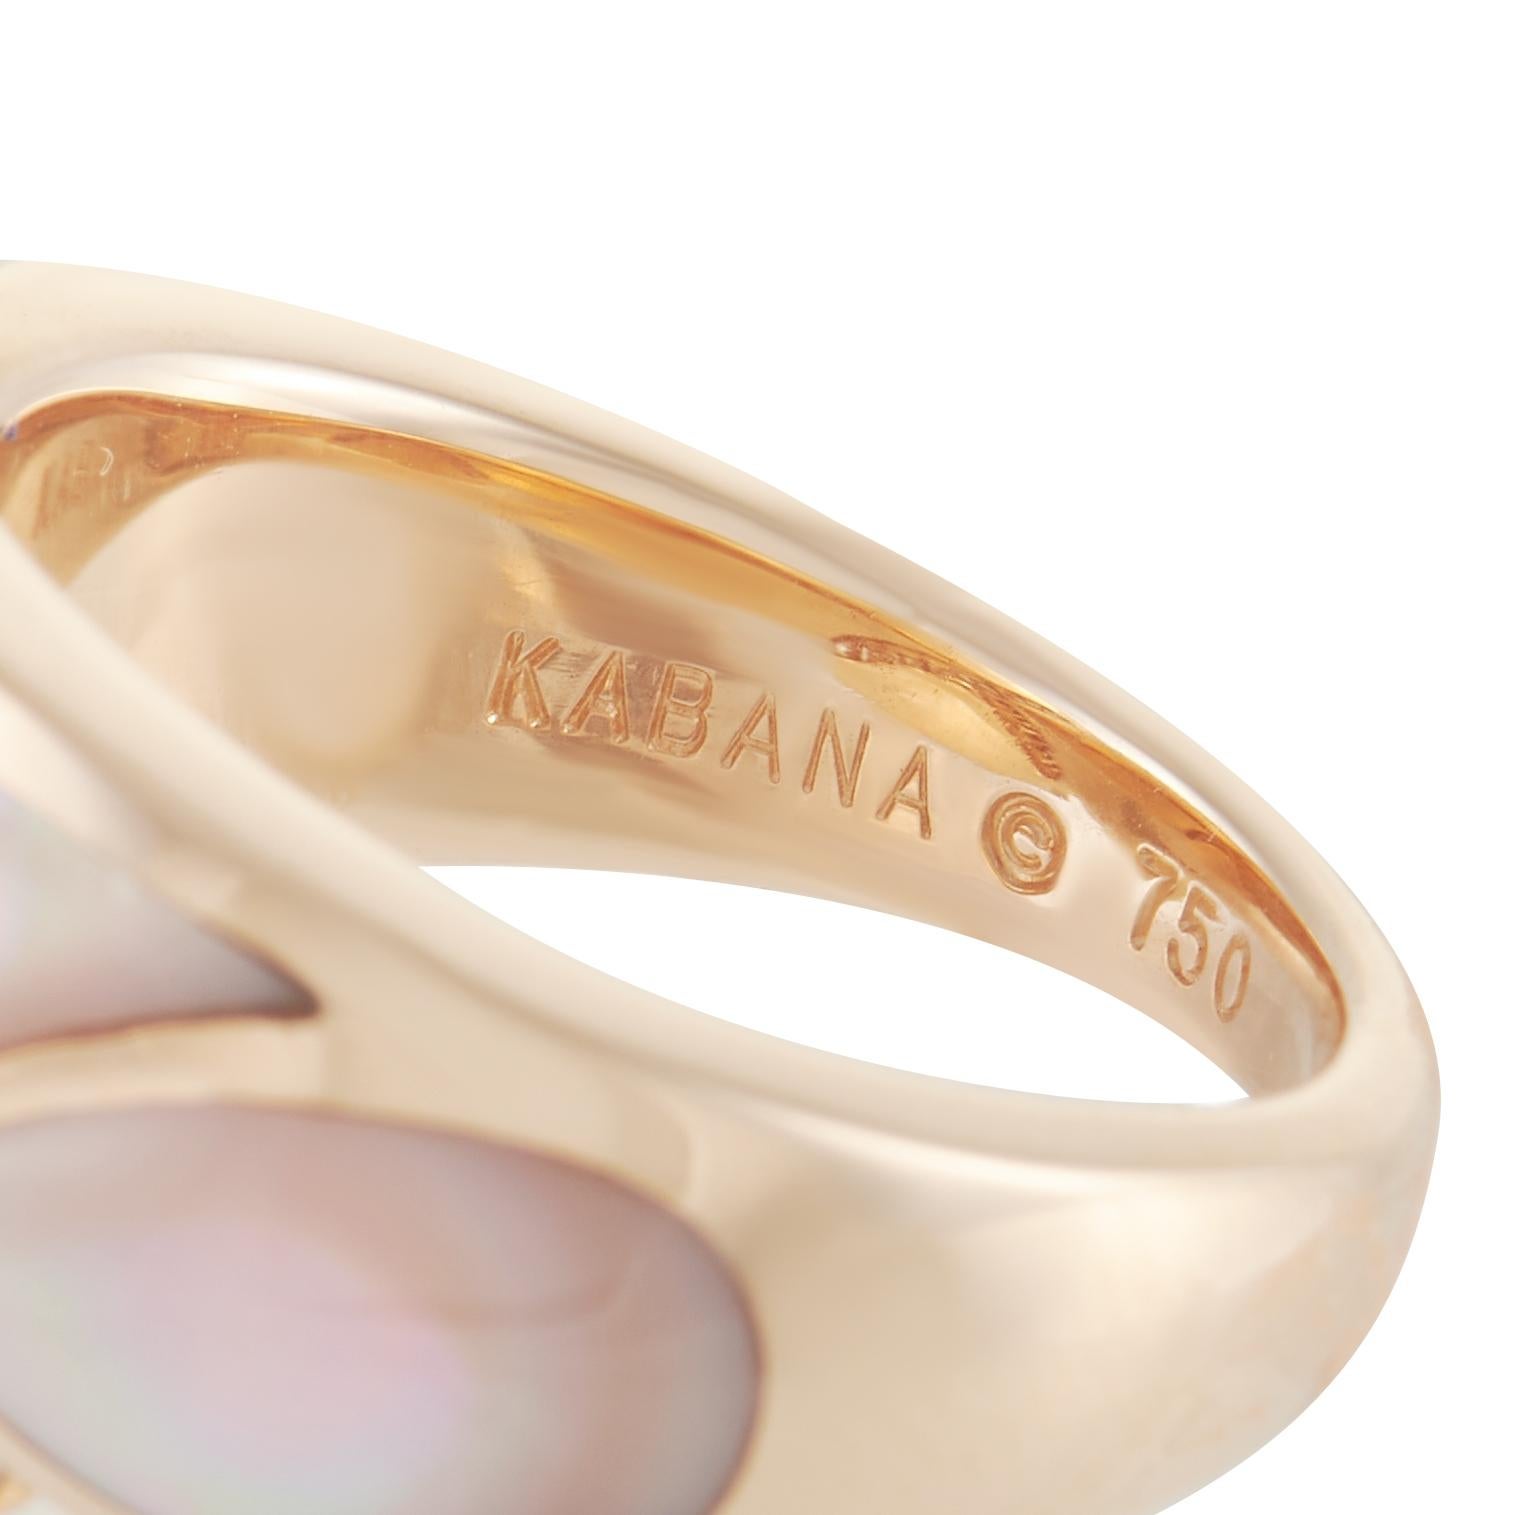 kabana mother of pearl ring